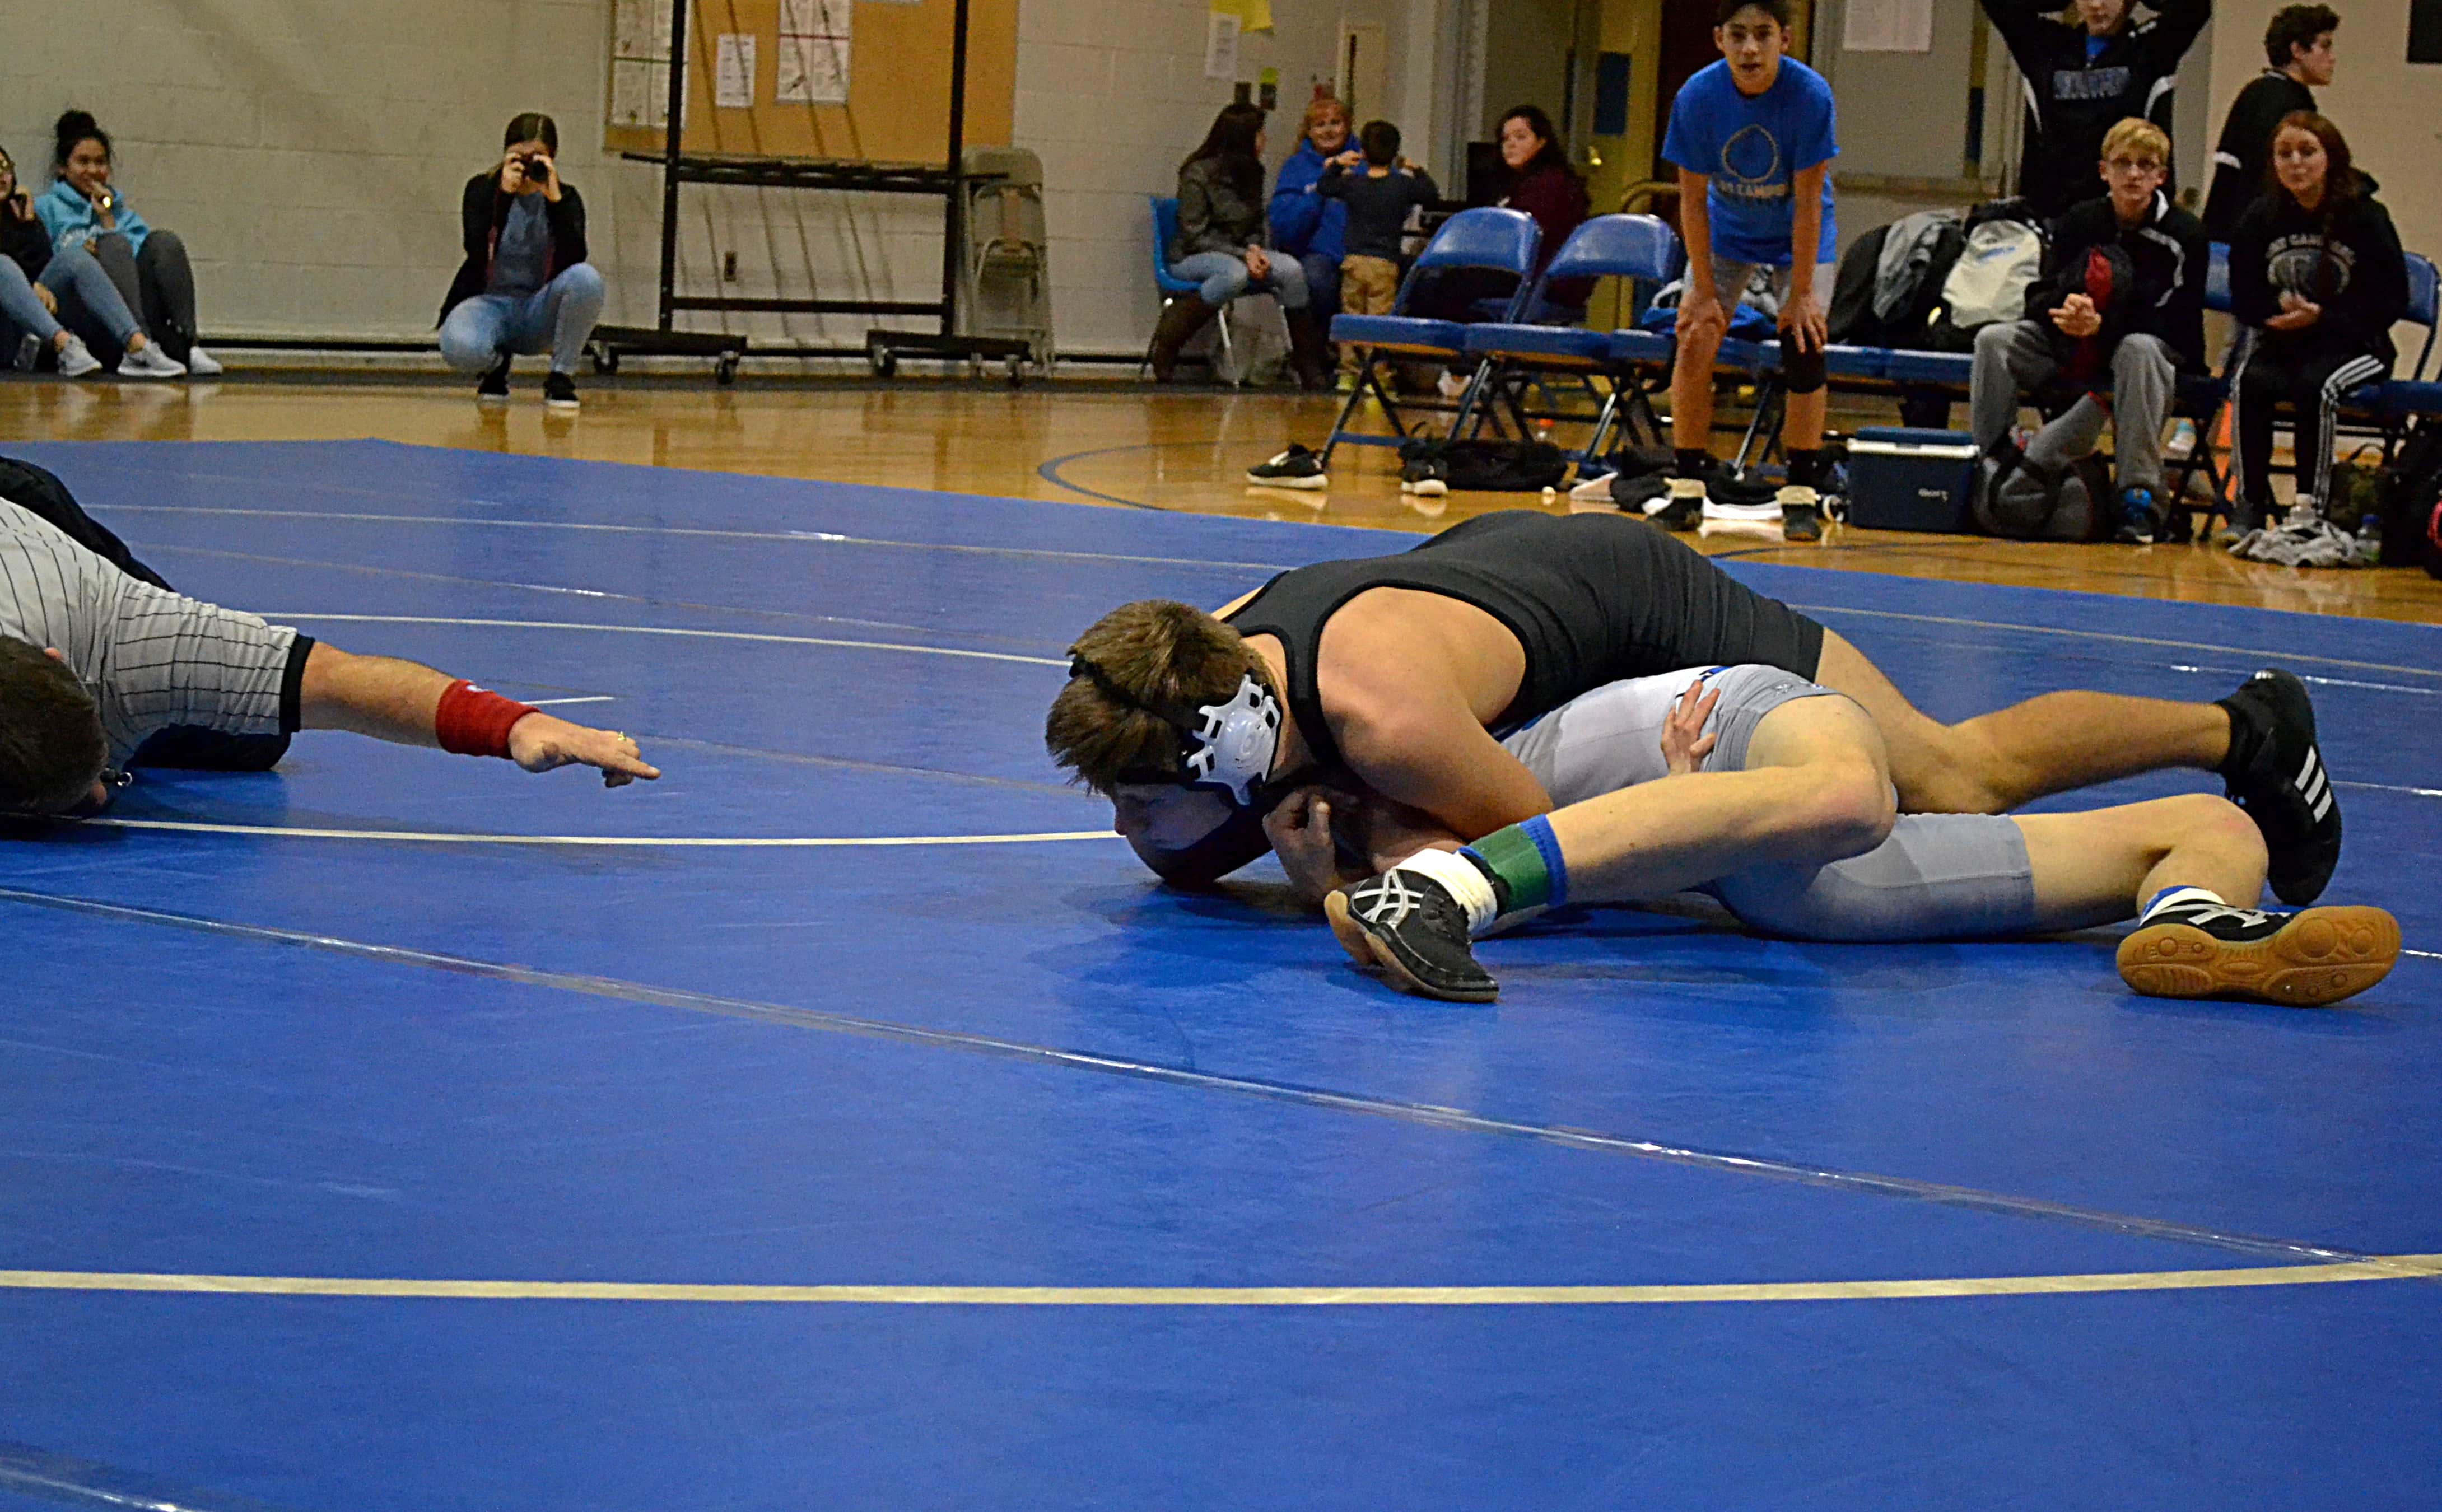 Alex Spears pinned Ft Campbell’s John Cogbill at 145 lbs.: Alex Spears pinned Ft Campbell's John Cogbill at 145 lbs.